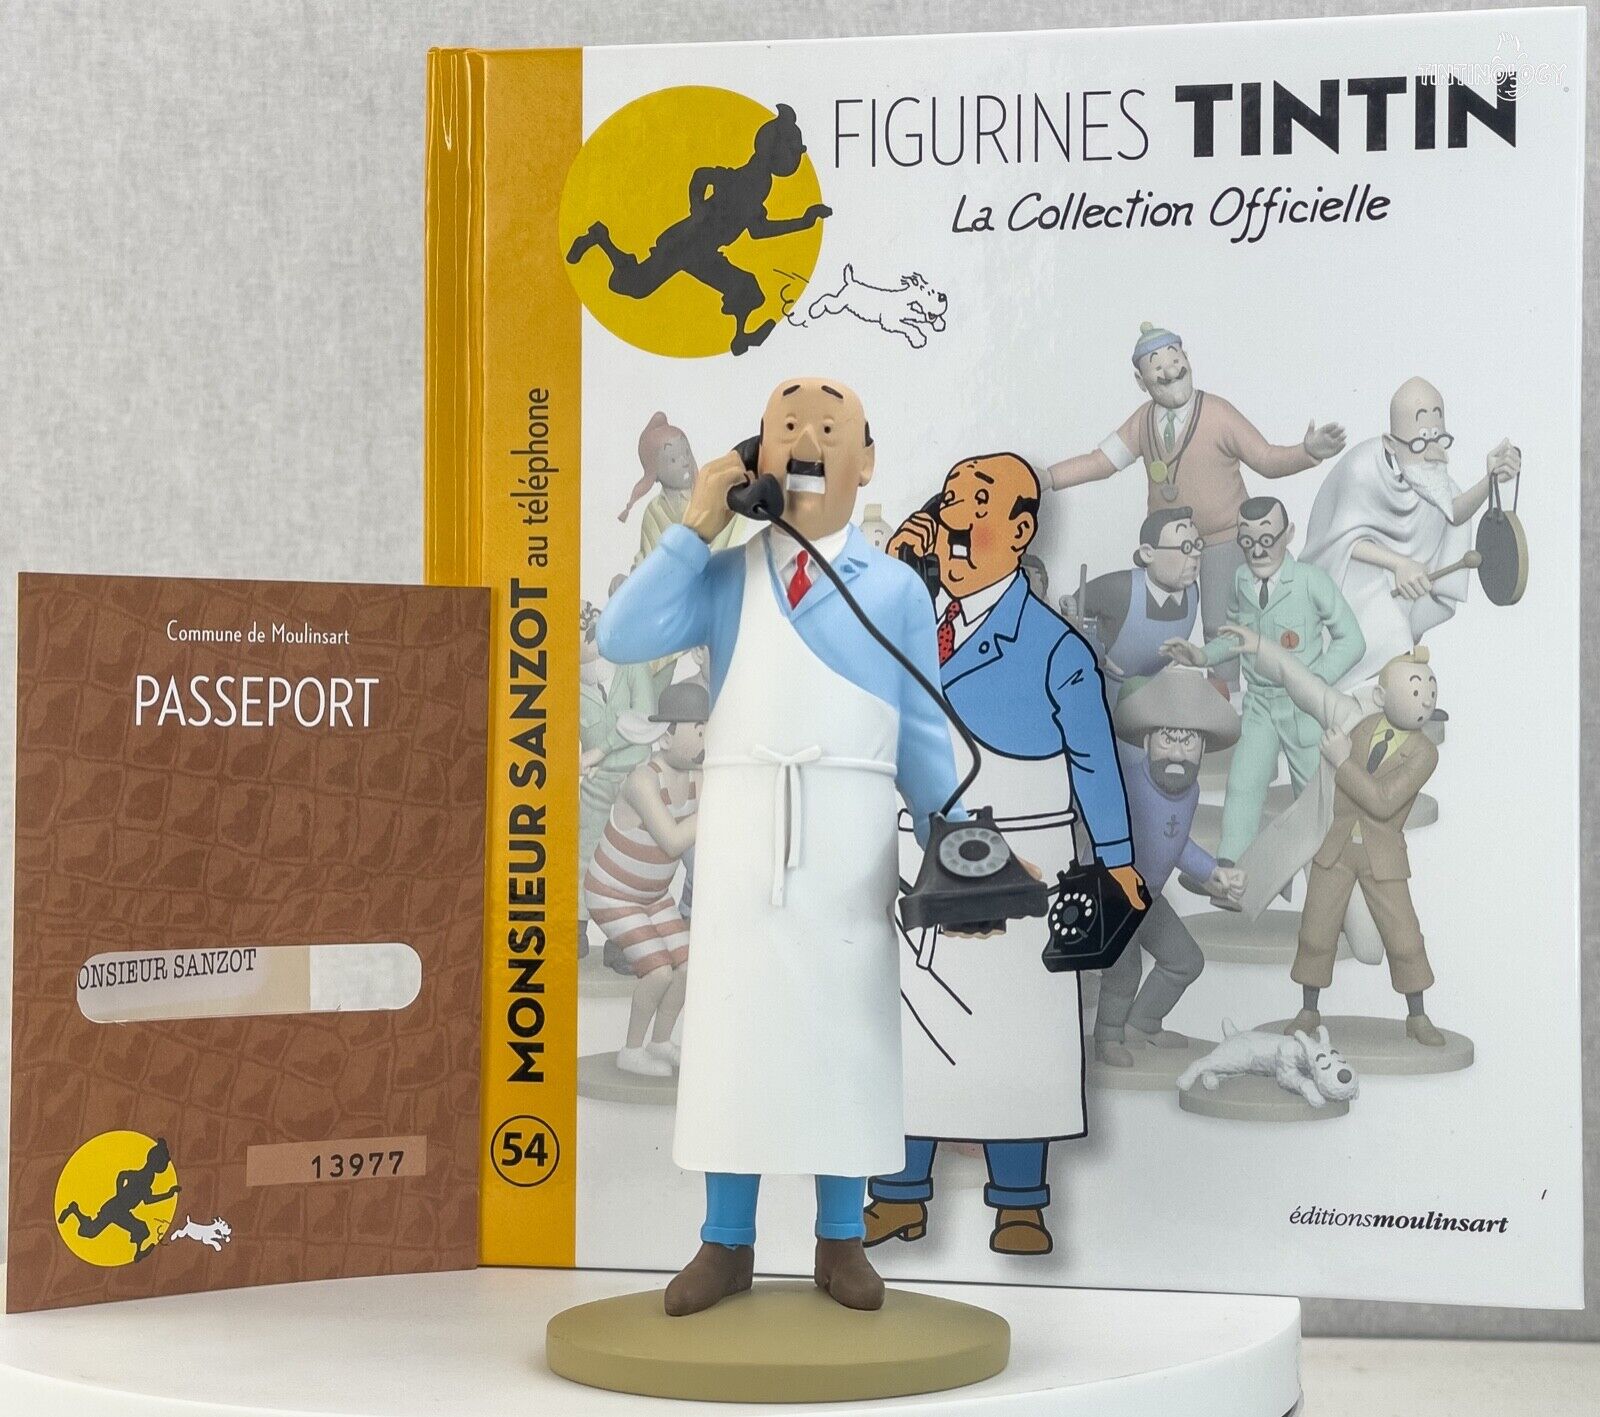 MOULINSART TINTIN FIGURINES OFFICIELLE # 51 to 100 BUY INDIVIDUALLY Rare Figures